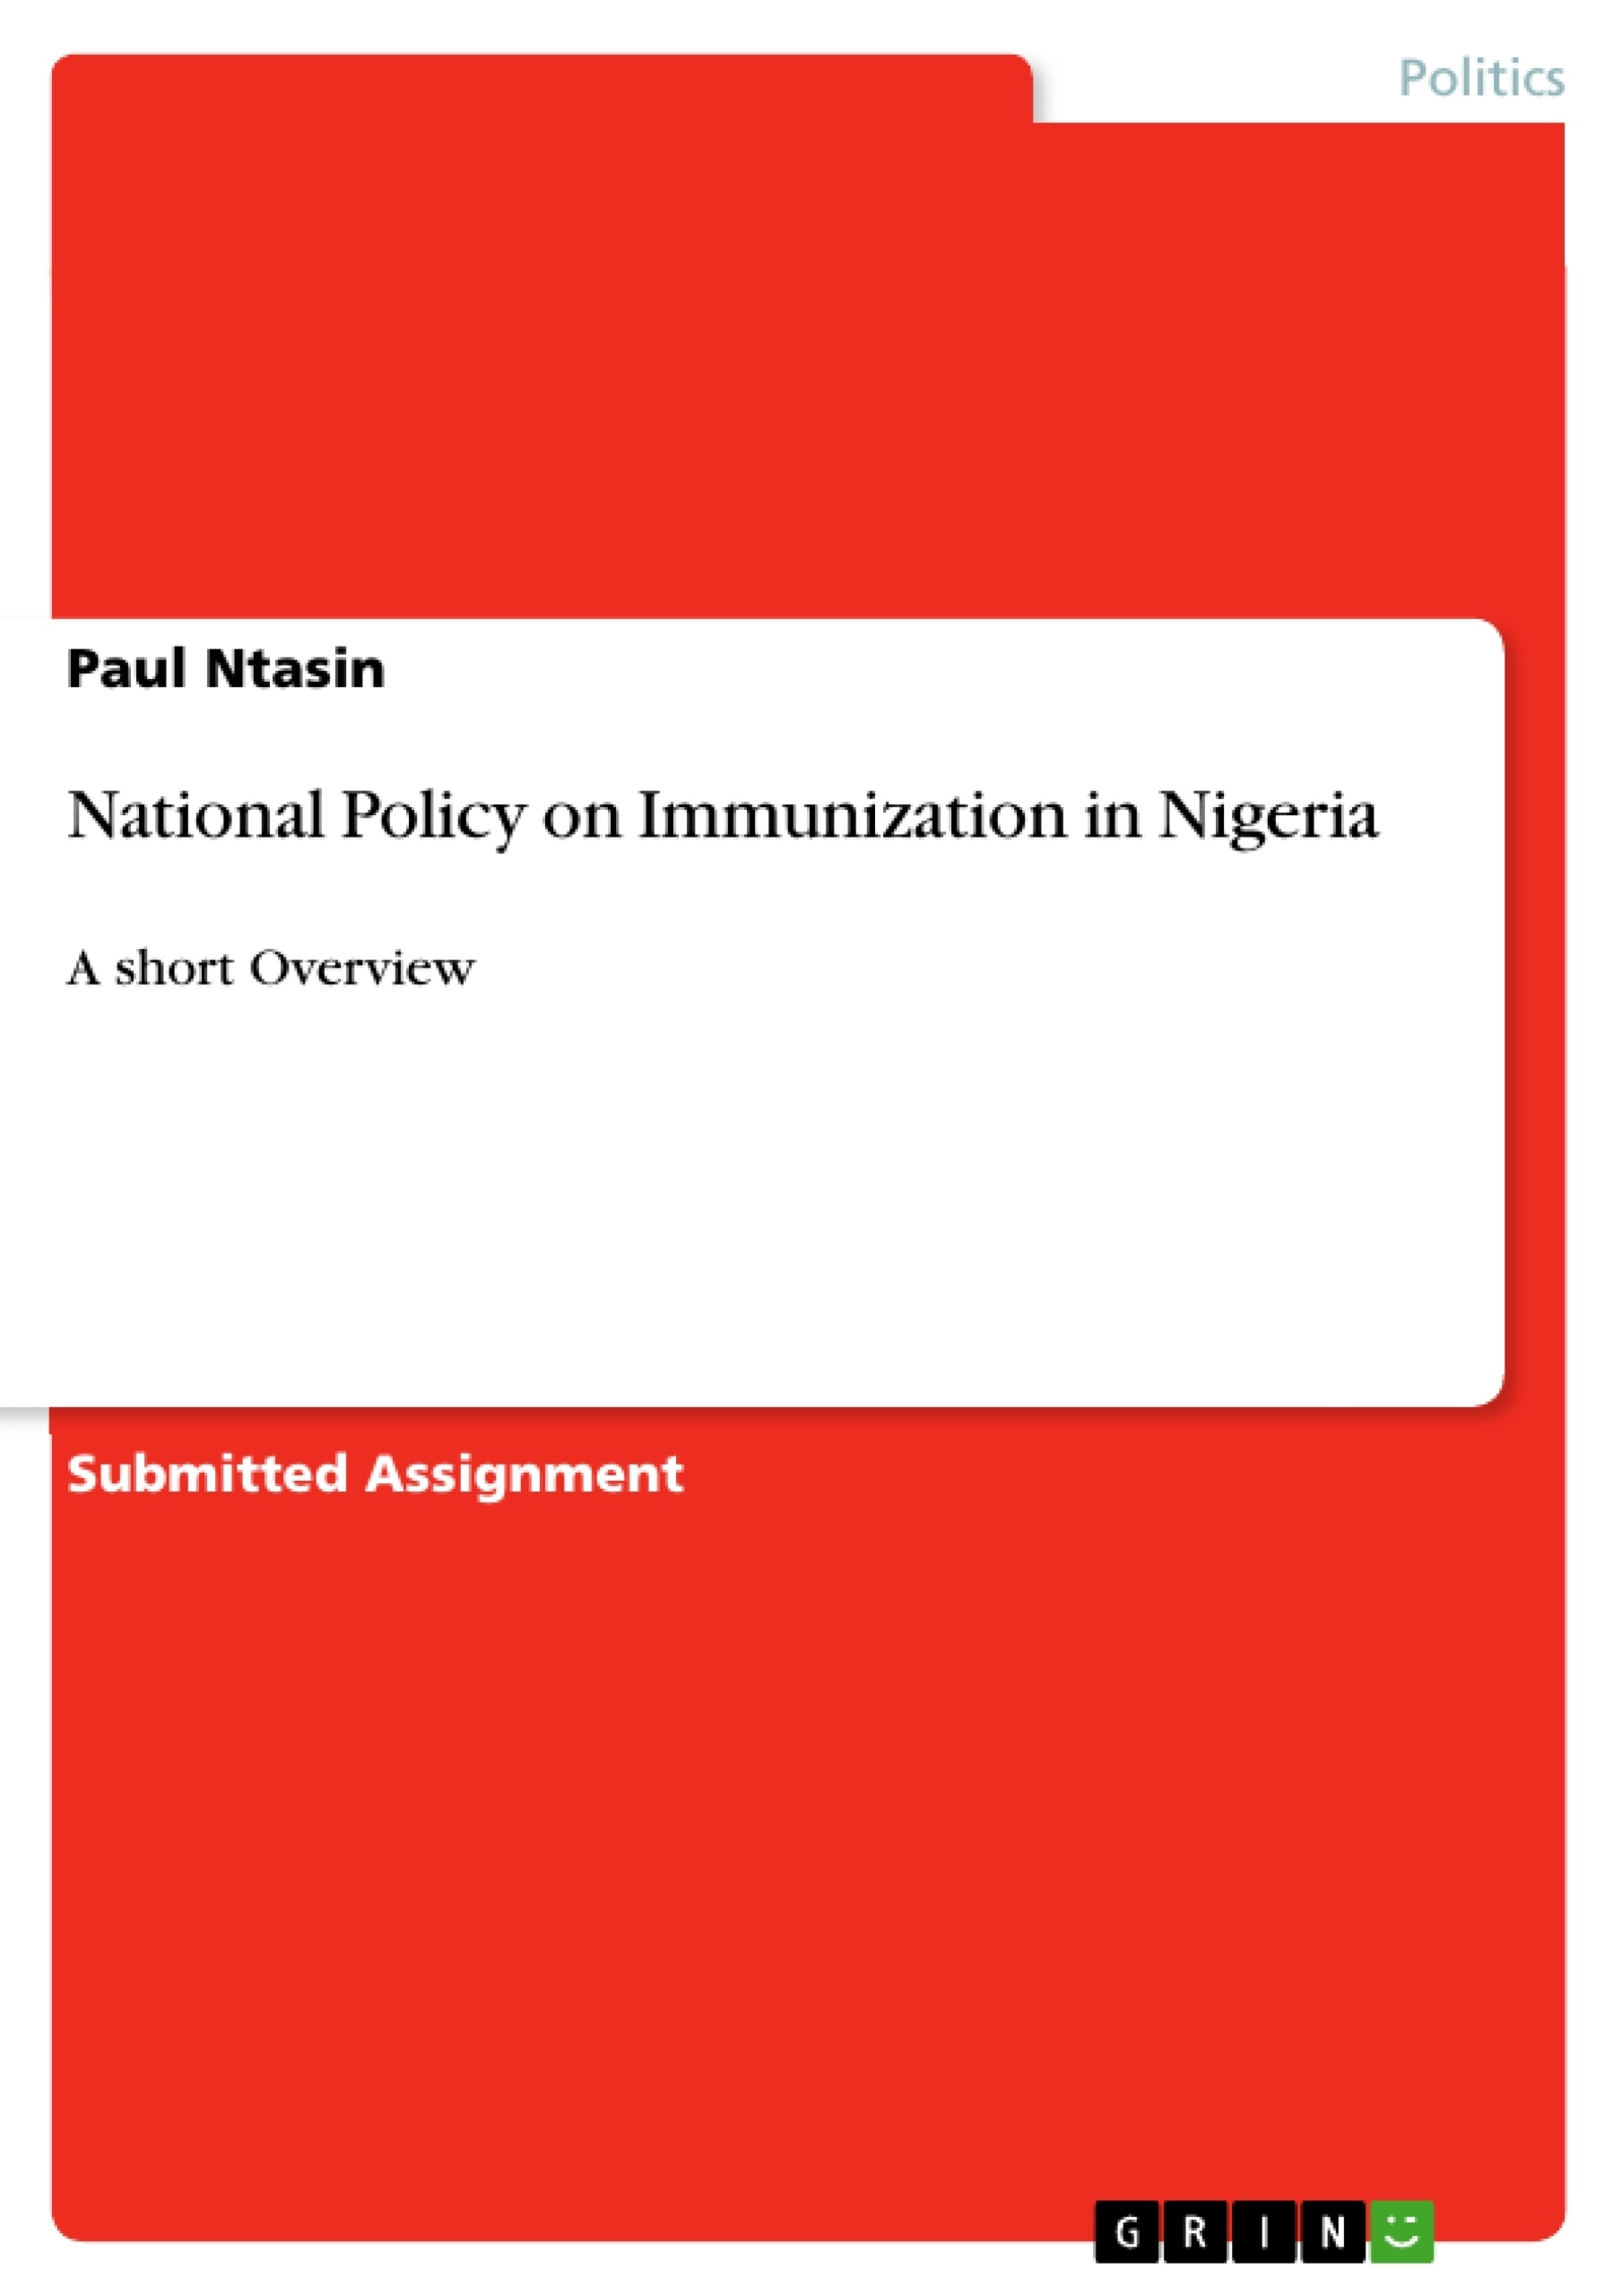 Title: National Policy on Immunization in Nigeria